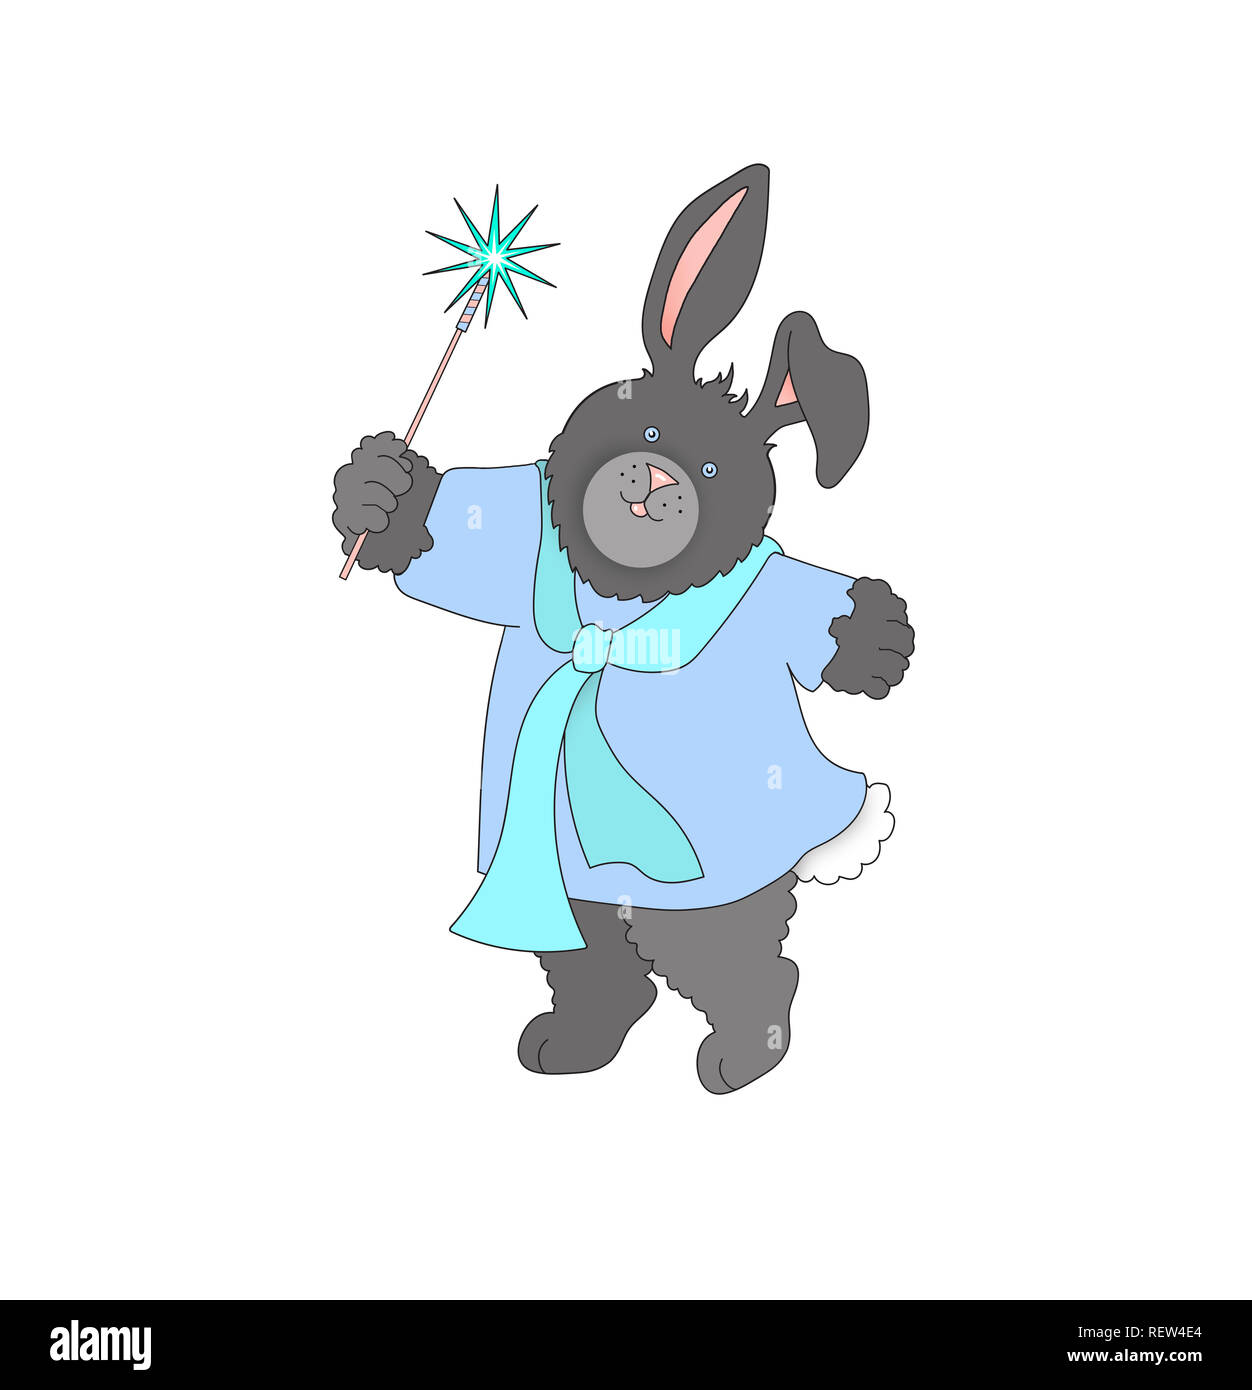 Illustration of a cute bunny rabbit wearing blue clothing and waving a sparkler against a white background Stock Photo